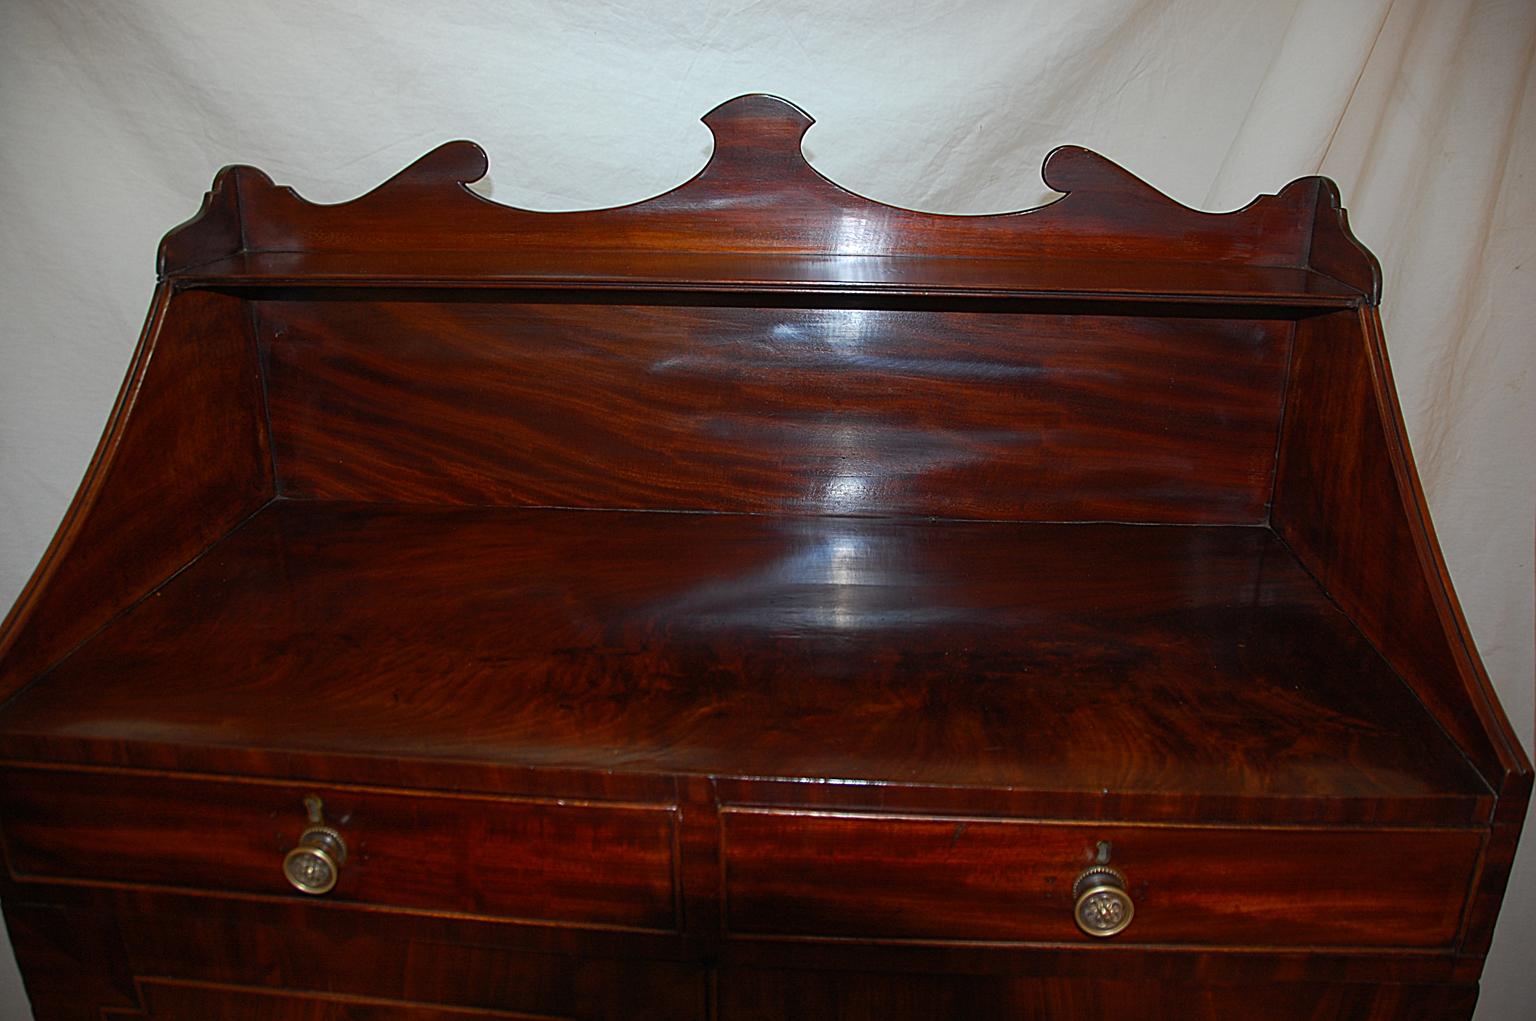 18th Century English Regency Mahogany Chiffonier with Four Drawers, Cupboards and Shelves